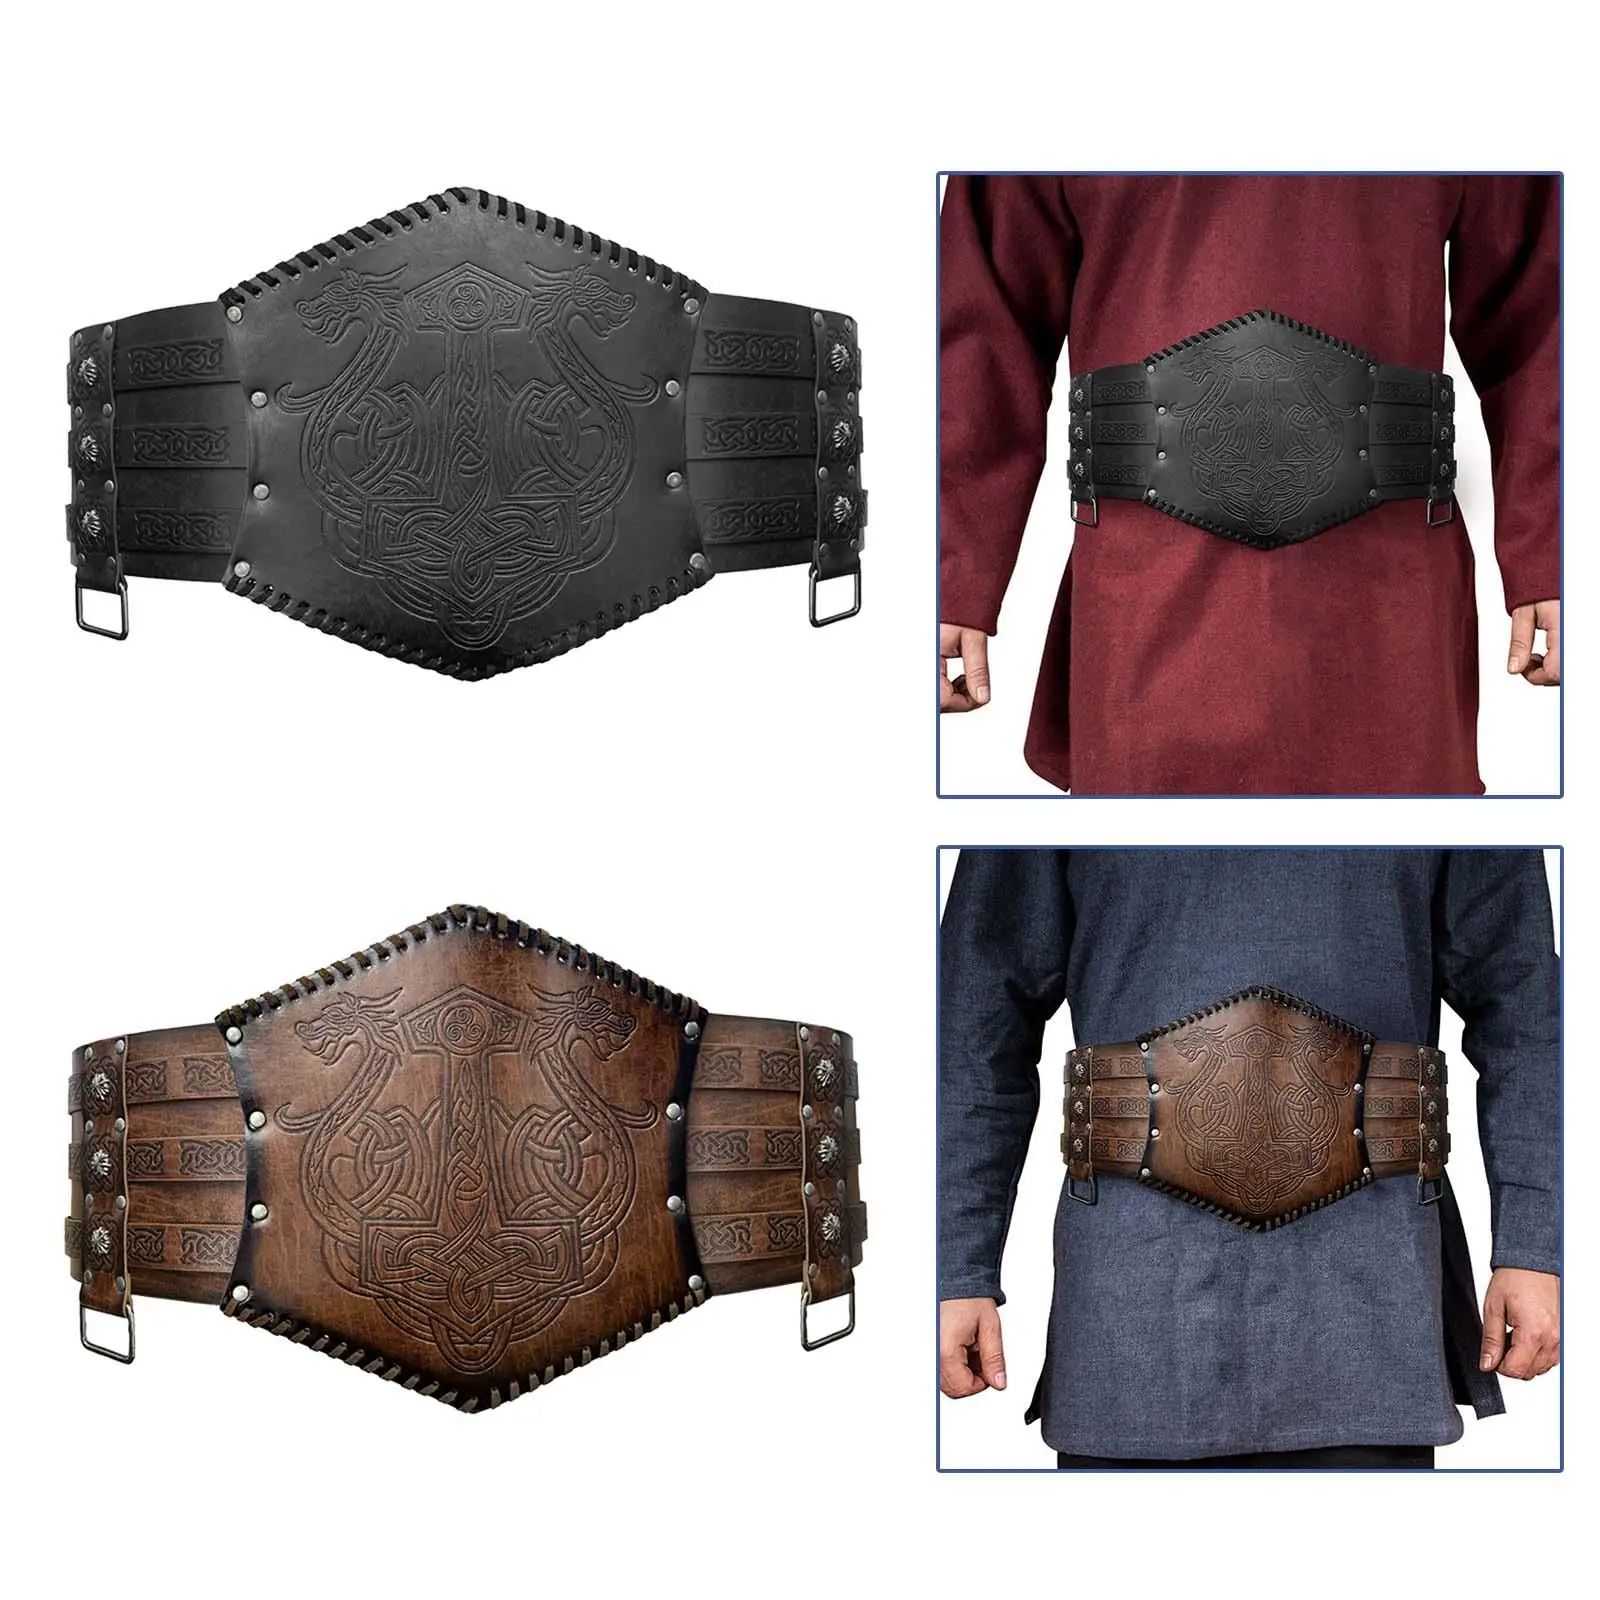 Medieval Girdle Belt Metal Buckle Adjustable Punk Girdle Sturdy Soft PU Leather for Easter Birthday Performance Dressing up